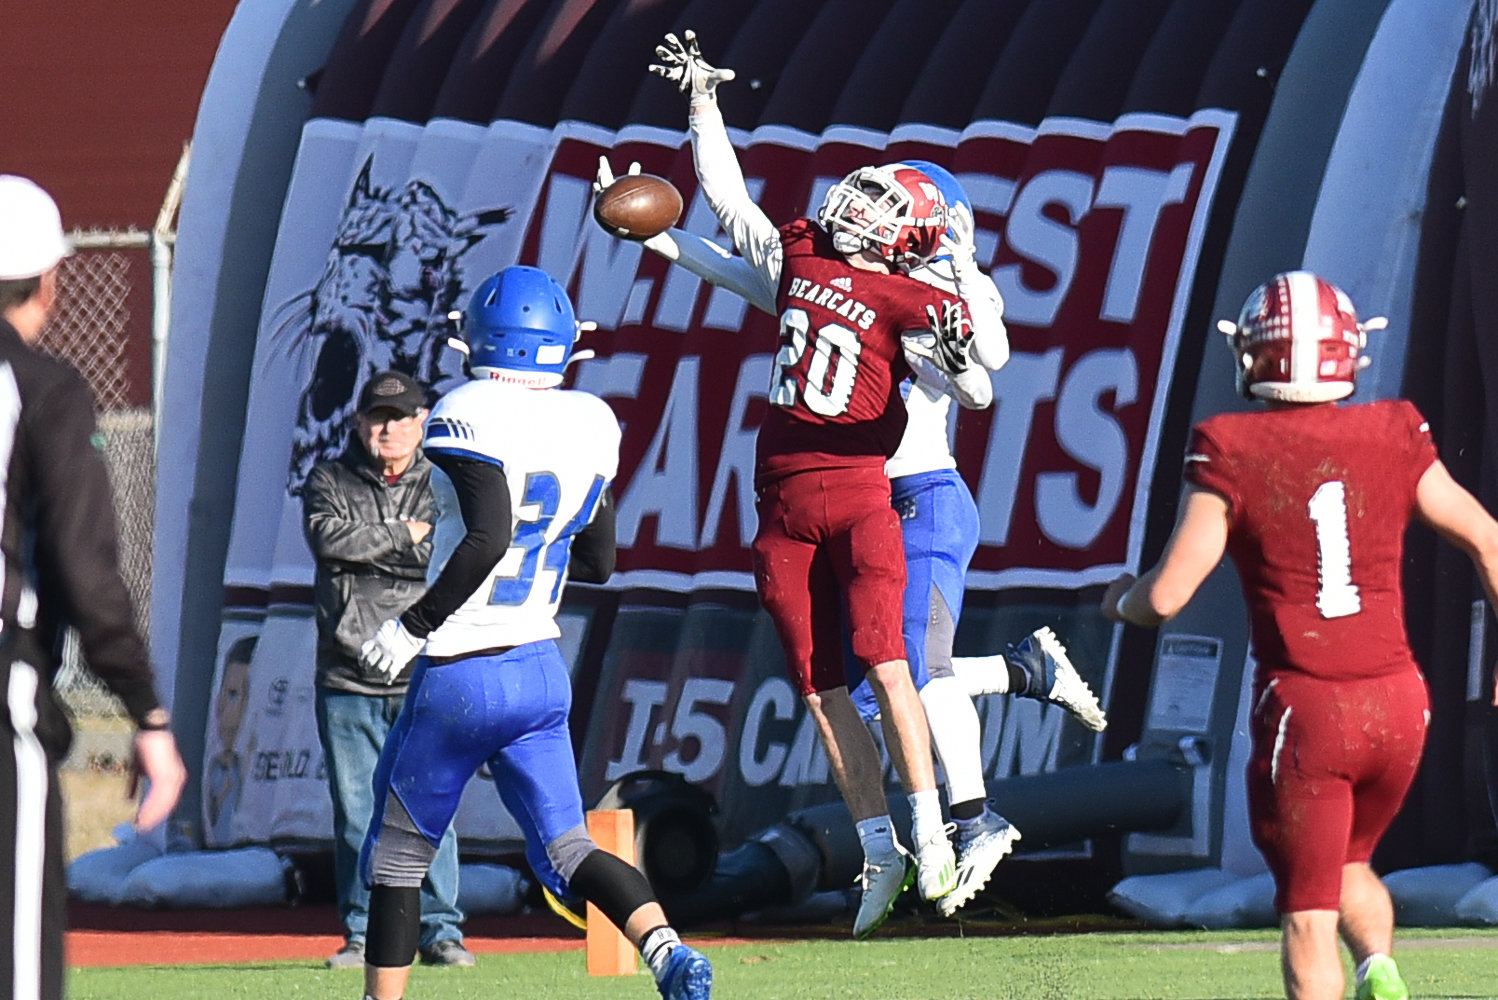 W.F. West's Cody Pennington breaks up a pass during the second quarter of the Bearcats' 31-14 win over Sedro-Woolley in the 2A state quarterfinals, at Centralia Tiger Stadium on Nov. 19.